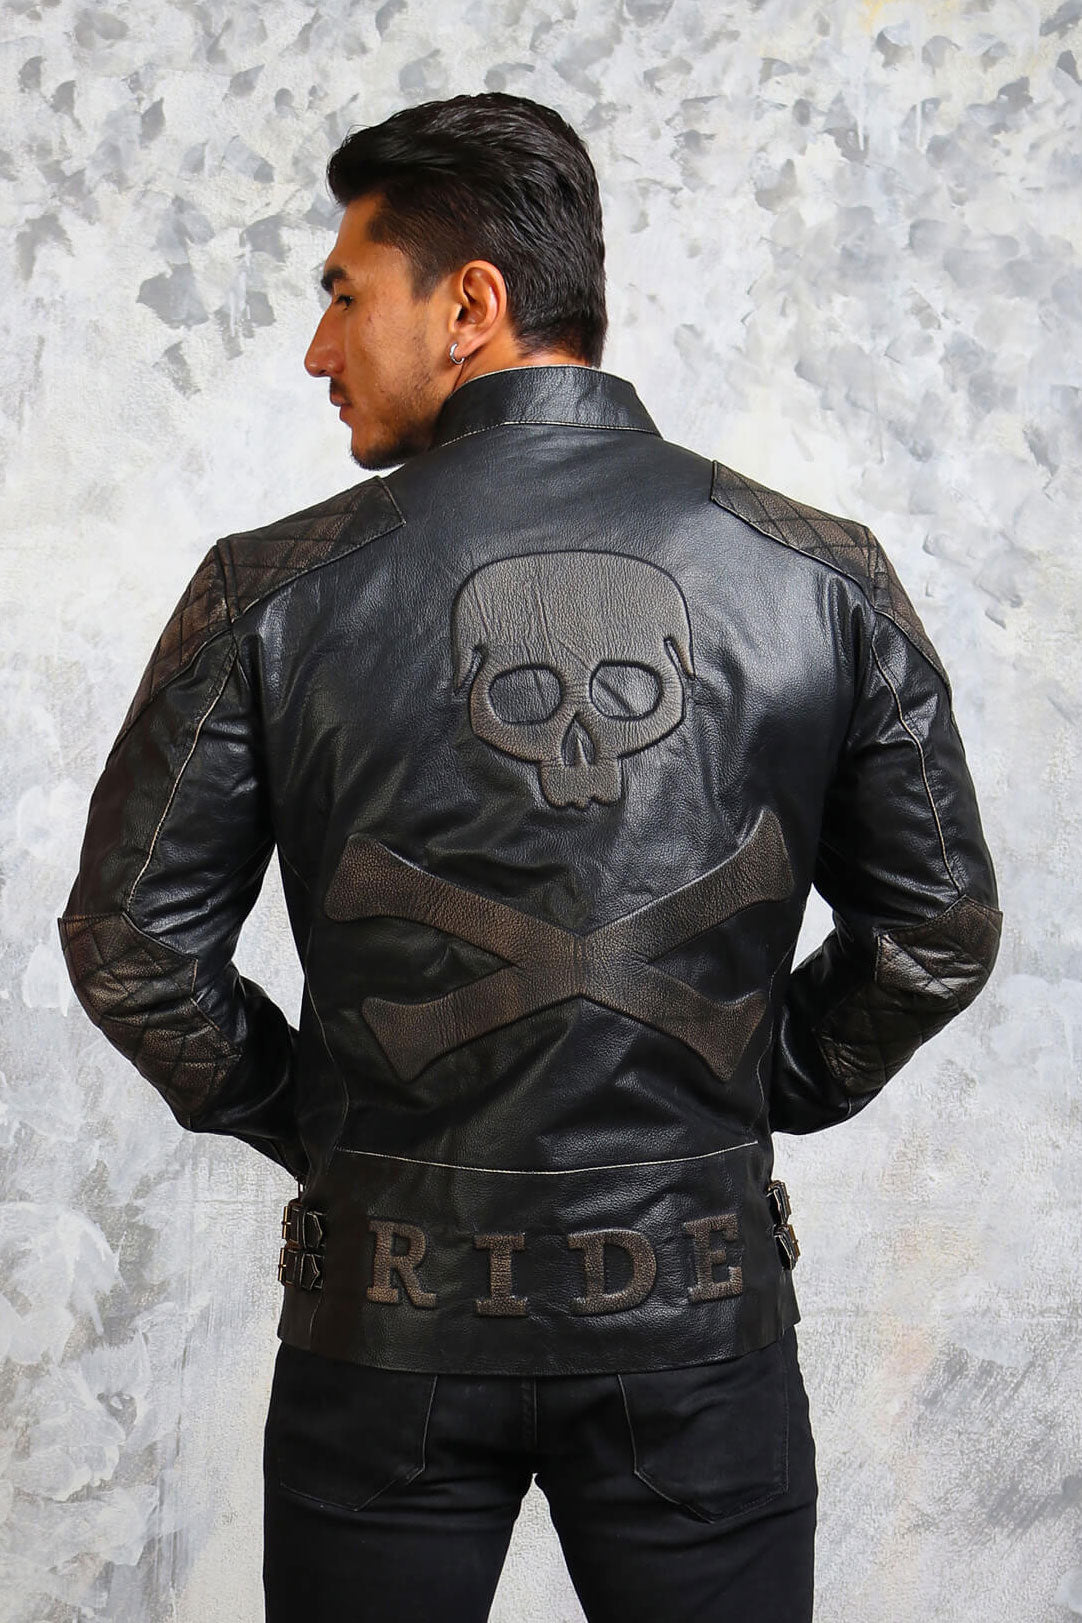 Top G Brown Andrew Tate Leather Jacket - USA Leather Factory